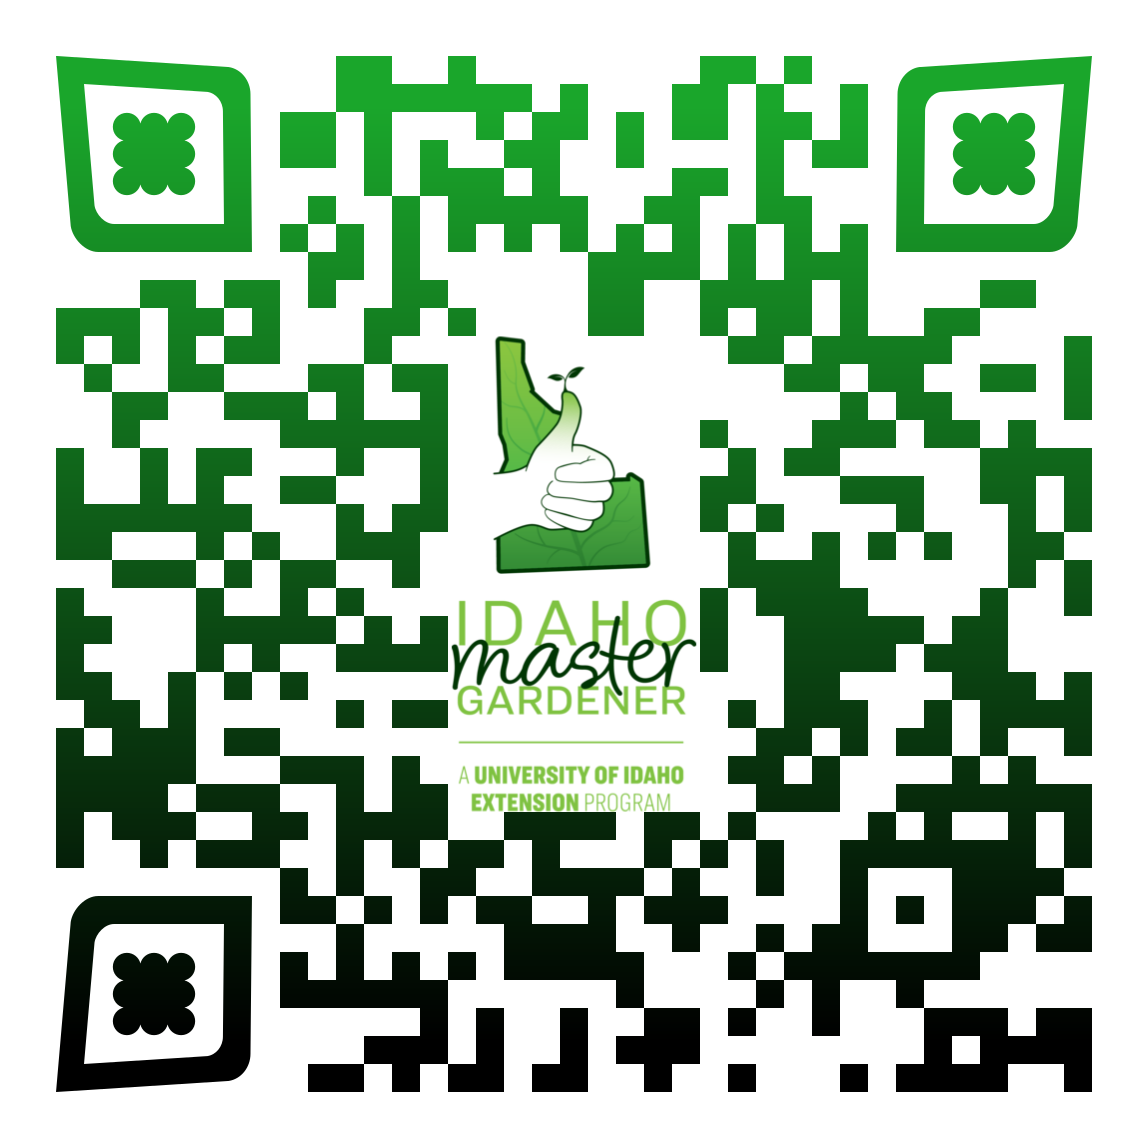 Horticulture class QR code graphic